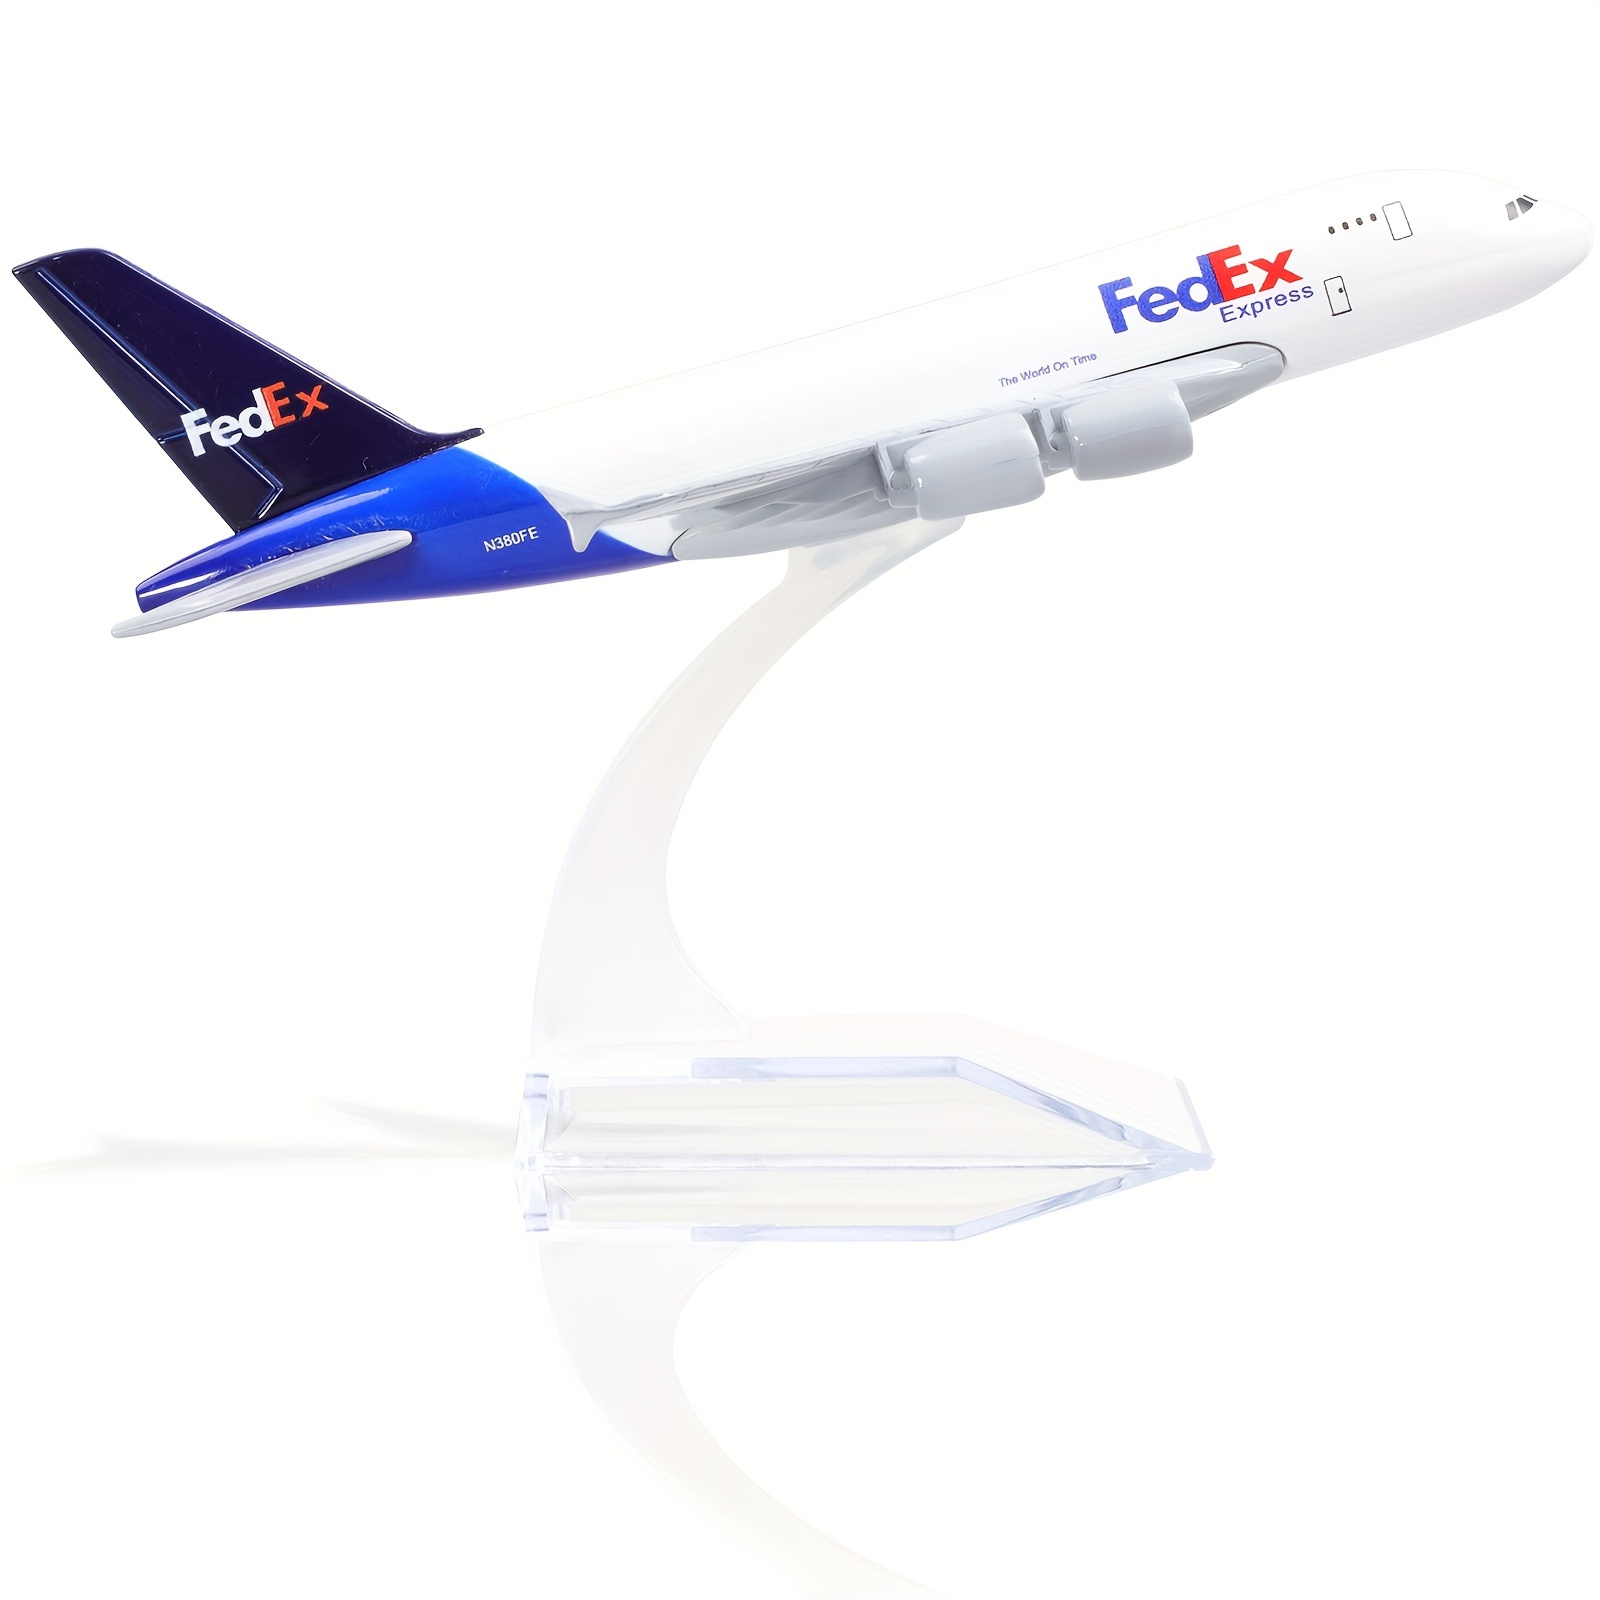 

Airbus A380 Airplane Model Toys Fedex Airlines 1:400 Metal Diecast Sky Jumbo Airliner Model For Collectibles And Gifts